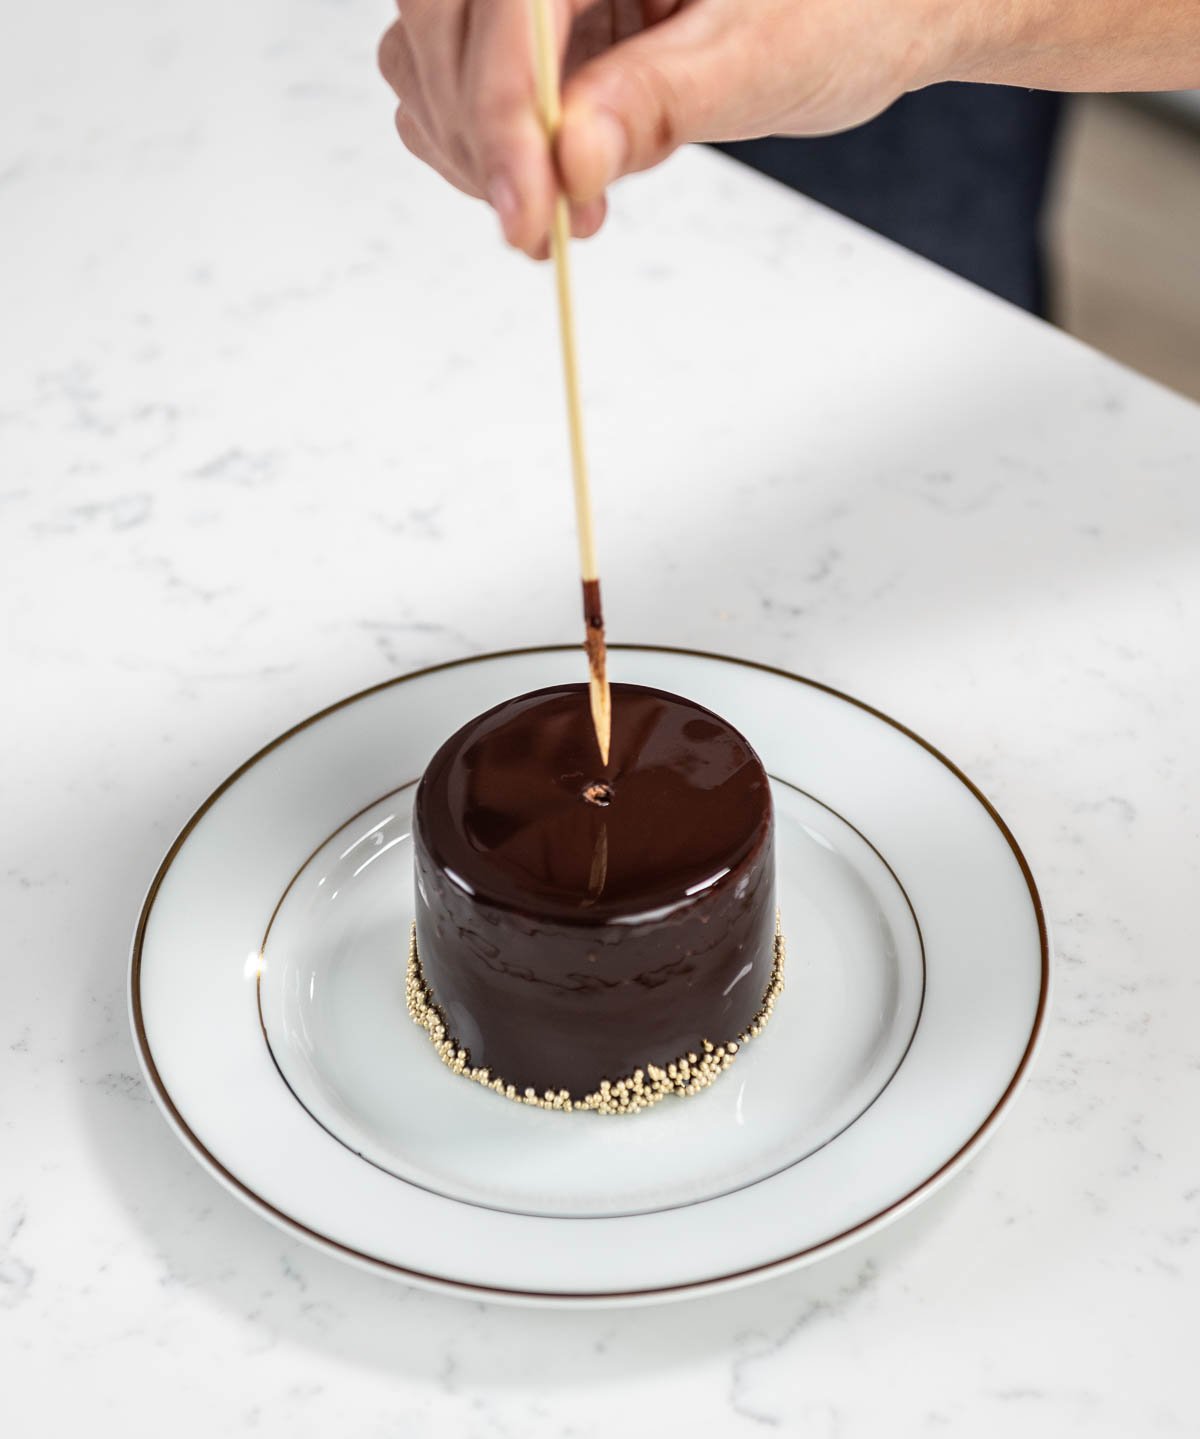 hand pulling toothpick out of hand placing edible gold on top of chocolate entremet